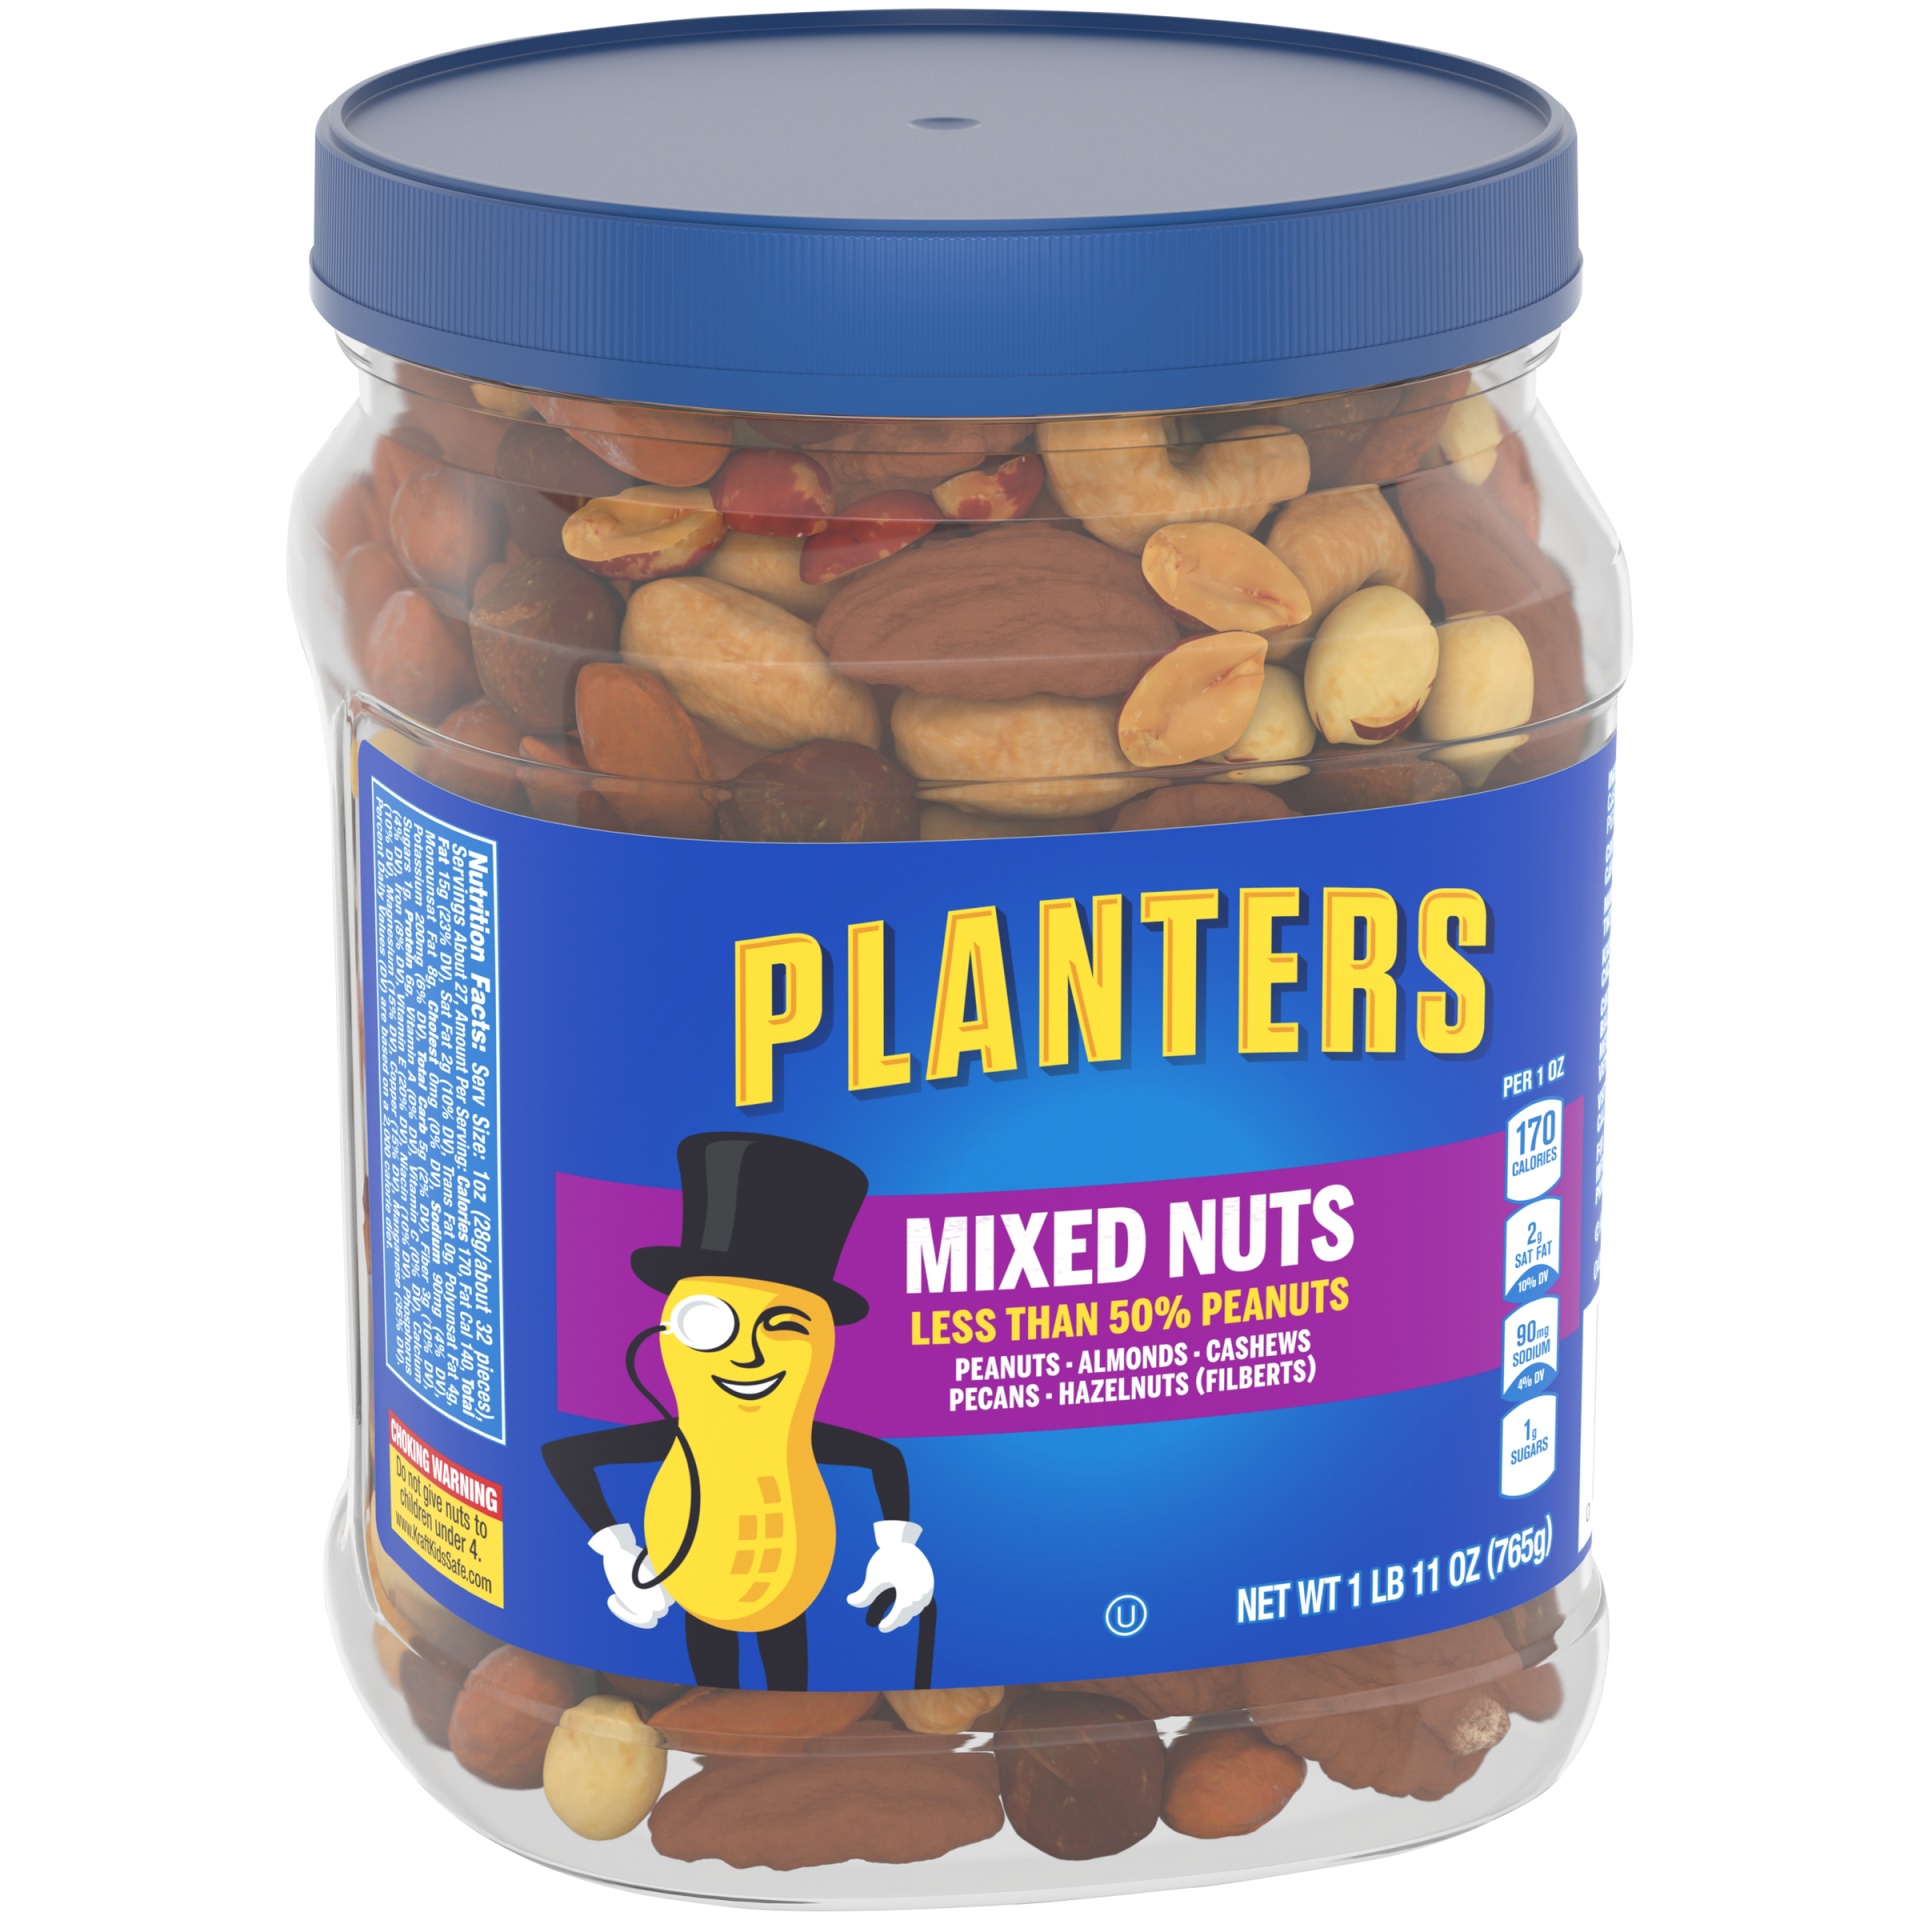 slide 10 of 14, Planters Mixed Nuts Less Than 50% Peanuts with Peanuts, Almonds, Cashews, Pecans & Hazelnuts, 27 oz